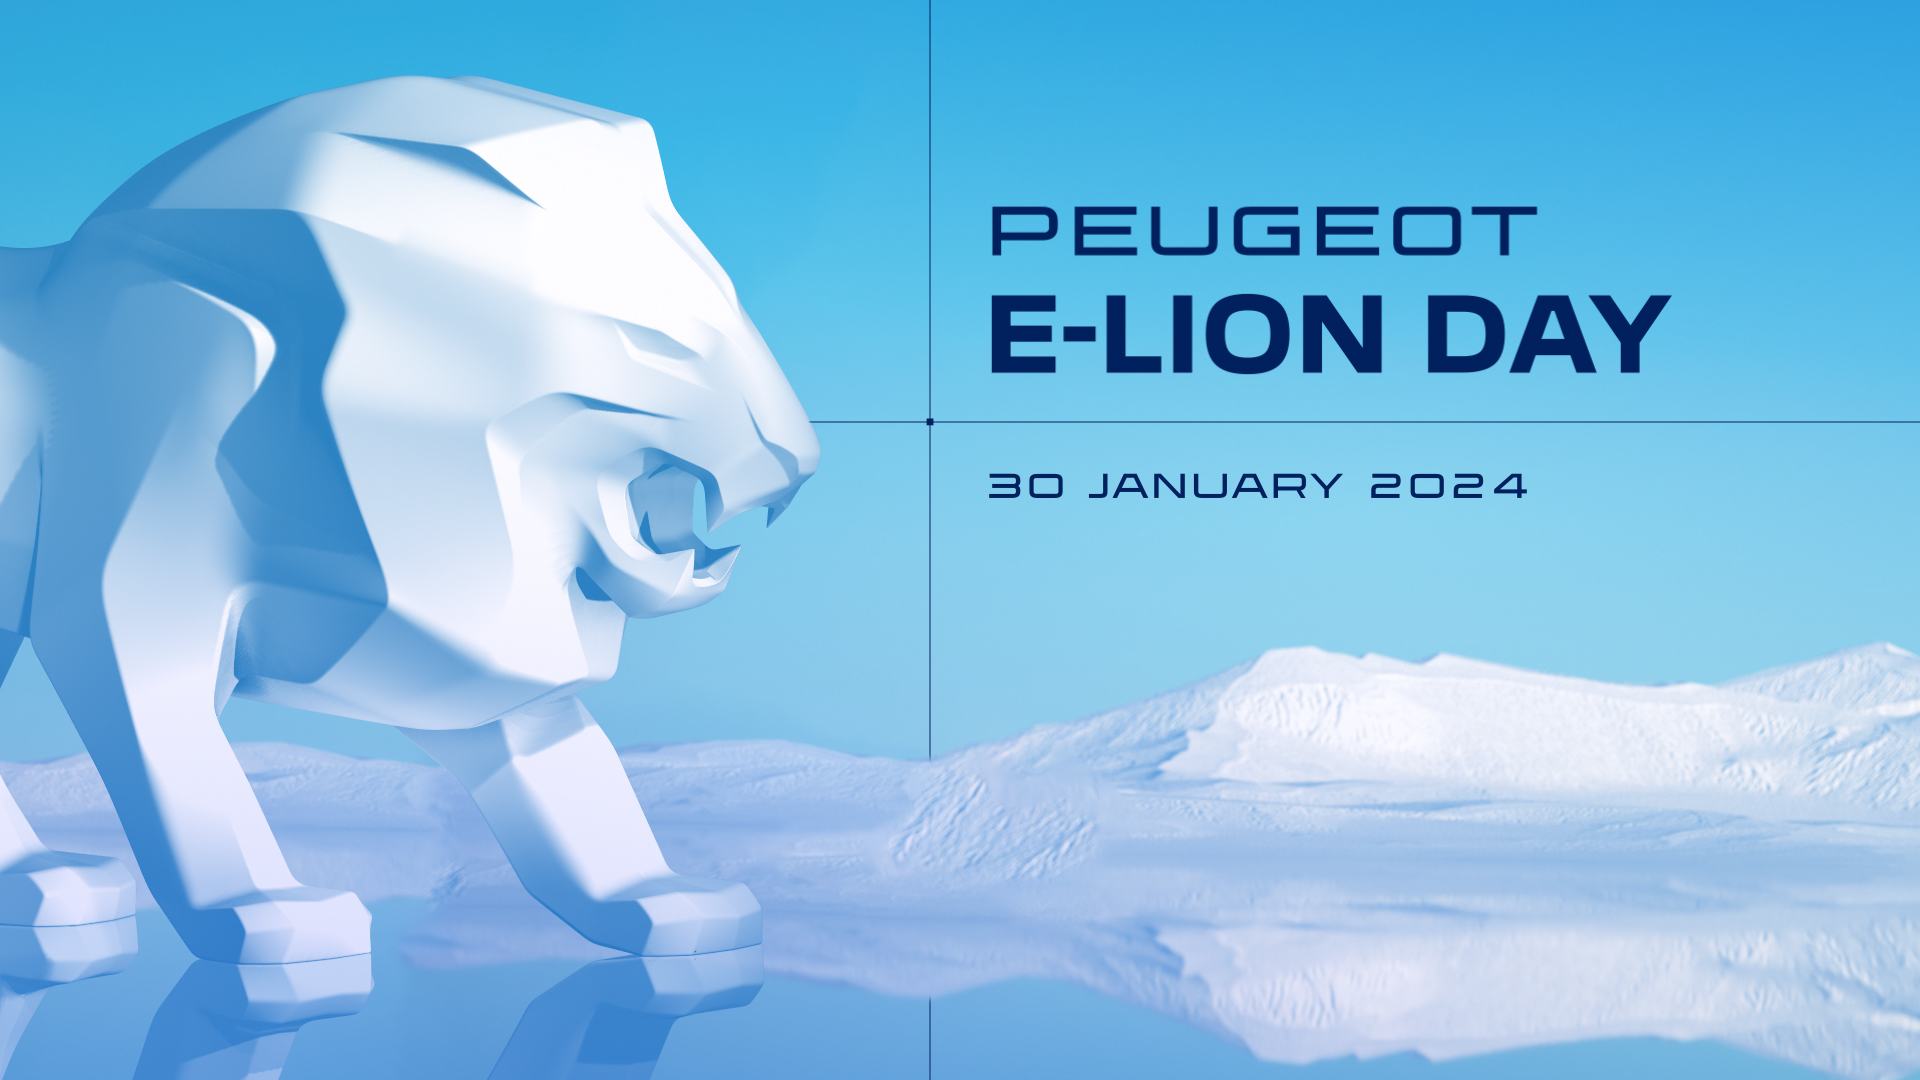 E-LION DAY 2024: PEUGEOT ANNOUNCES OFFERS 8 YEARS PEACE-OF-MIND WITH “PEUGEOT ALLURE CARE” ON THE NEW E-3008